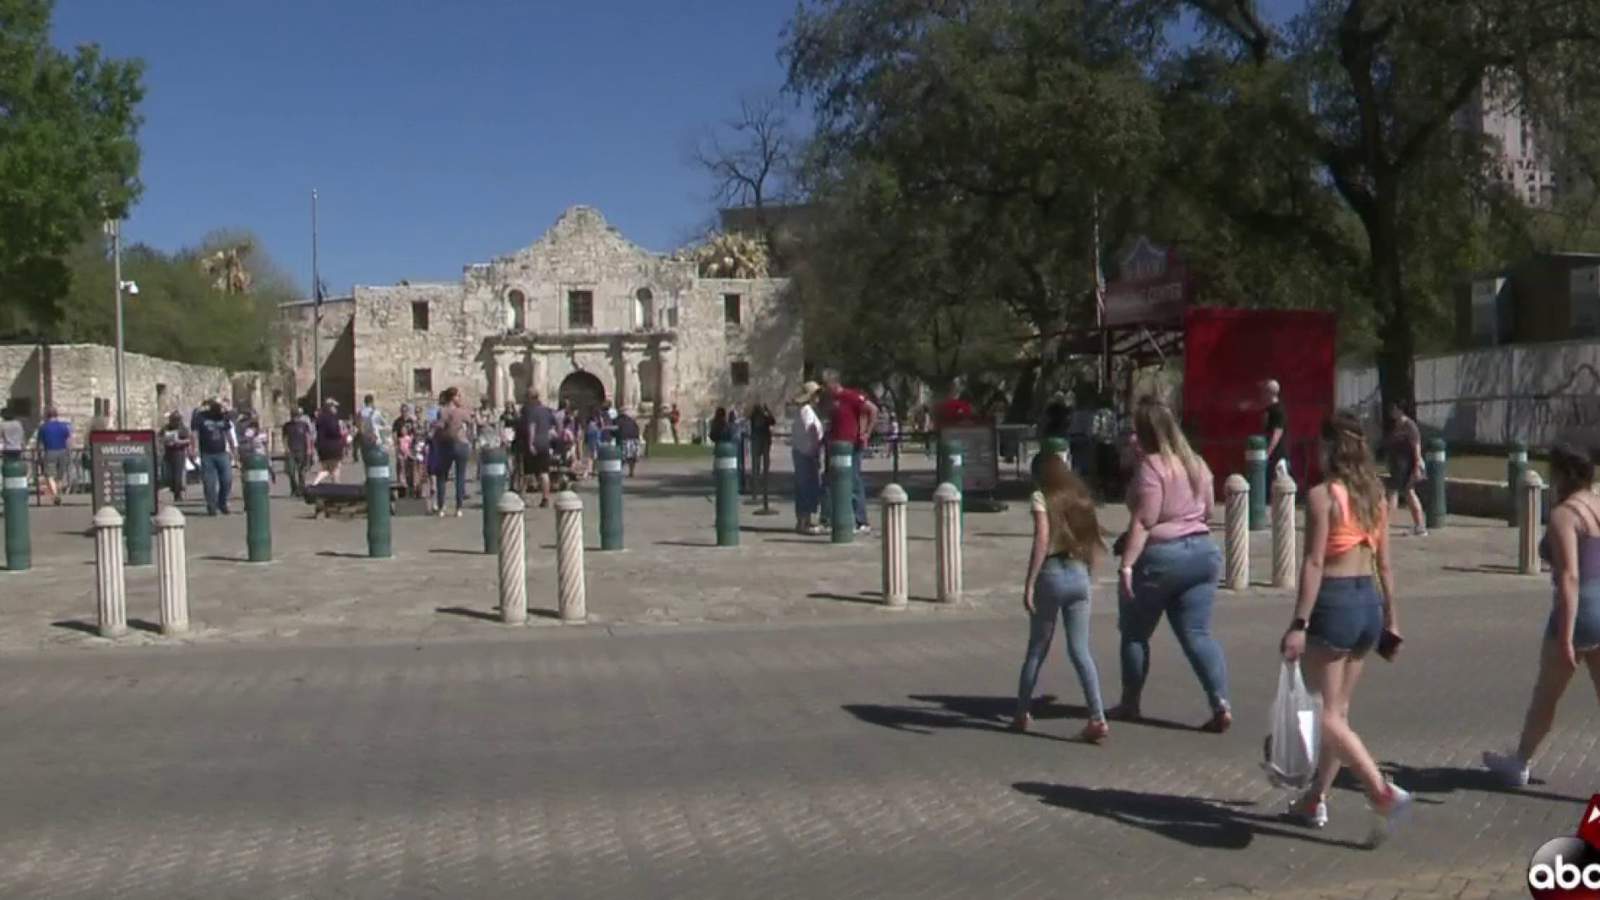 Hospitality industry welcomes tourists back to San Antonio with open arms